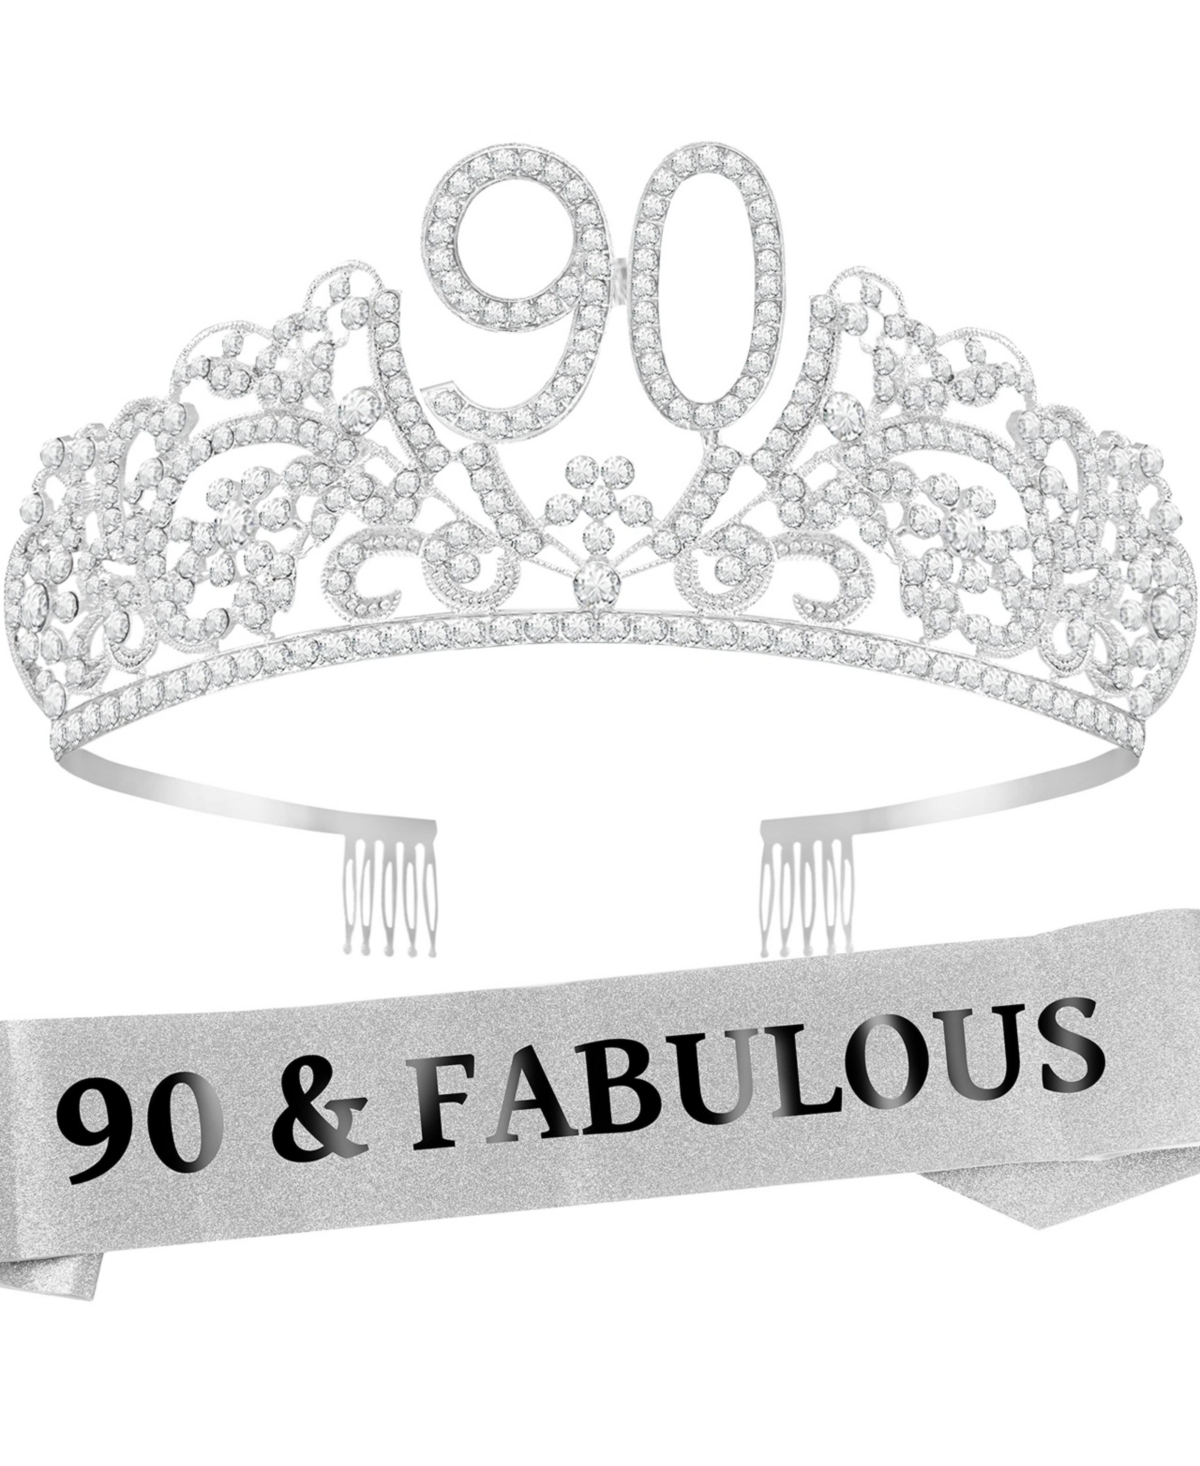 VeryMerryMakering 90th Birthday Sash and Tiara for Women - Glitter Sash with Flowers and Rhinestone Silver Metal Tiara, Perfect 90th Birthday Gifts fo